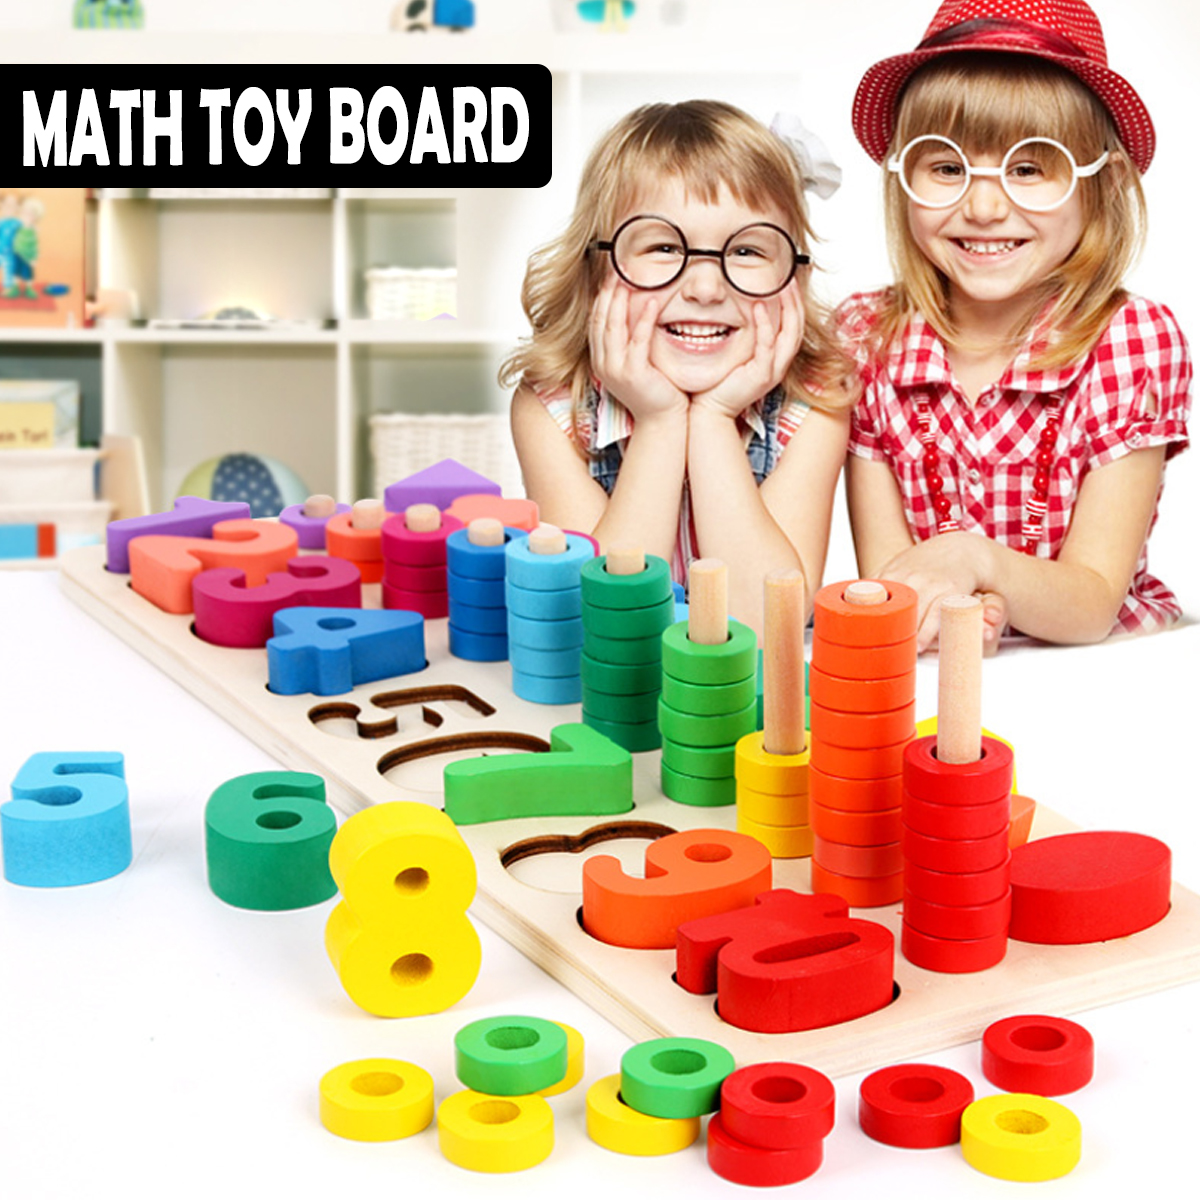 Wooden-Math-Toy-Board-Montessori-Counting-Board-Preschool-Learning-Toys-for-Children-Gifts-1629382-1